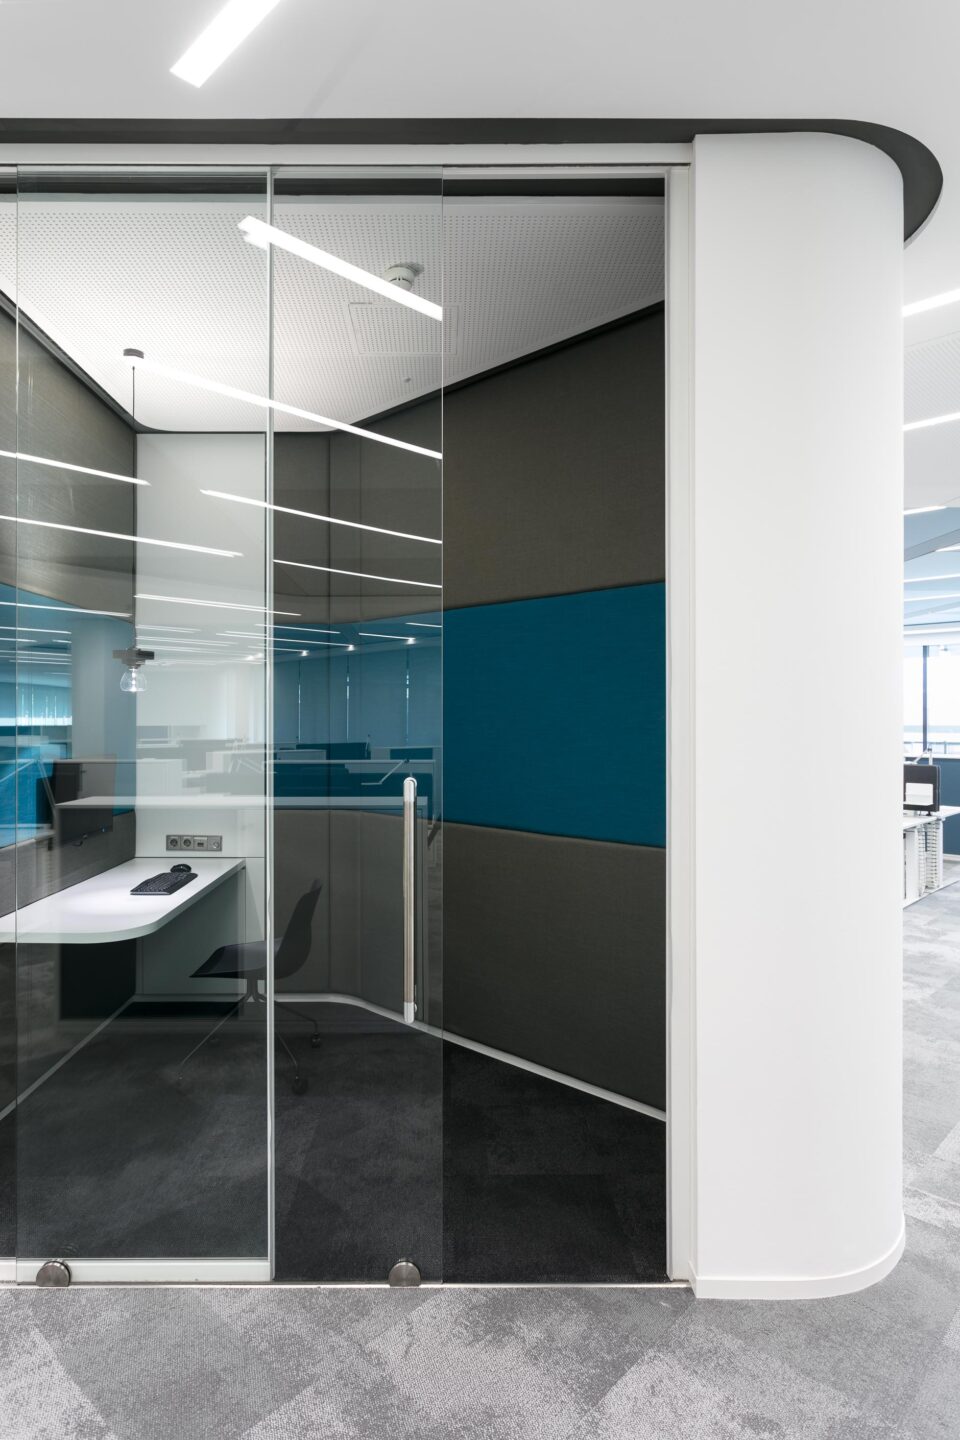 feco-feederle│partition wall systems│fecotür glass│Head Office of Stadtwerke